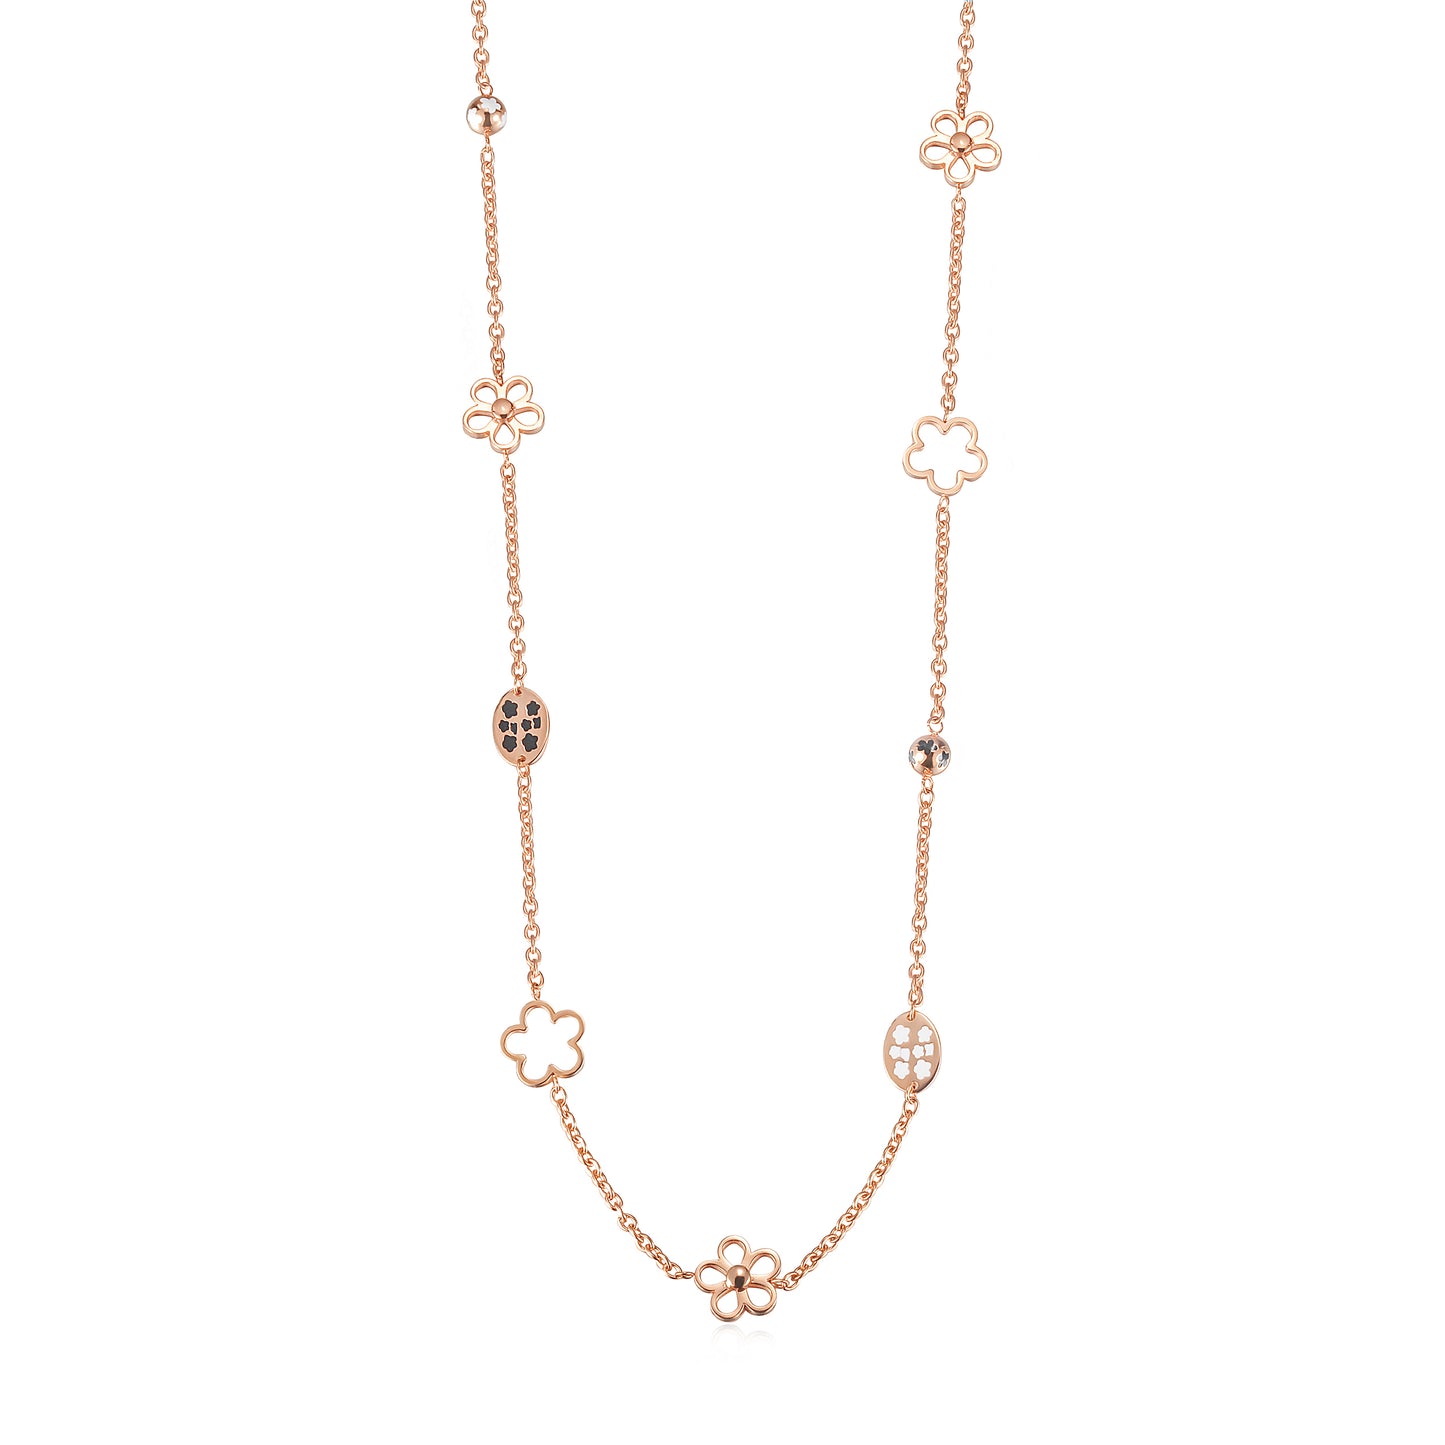 Black Flower Lucky Clover Rose Gold Pave CZ Jewelry Set: Earrings & Necklace